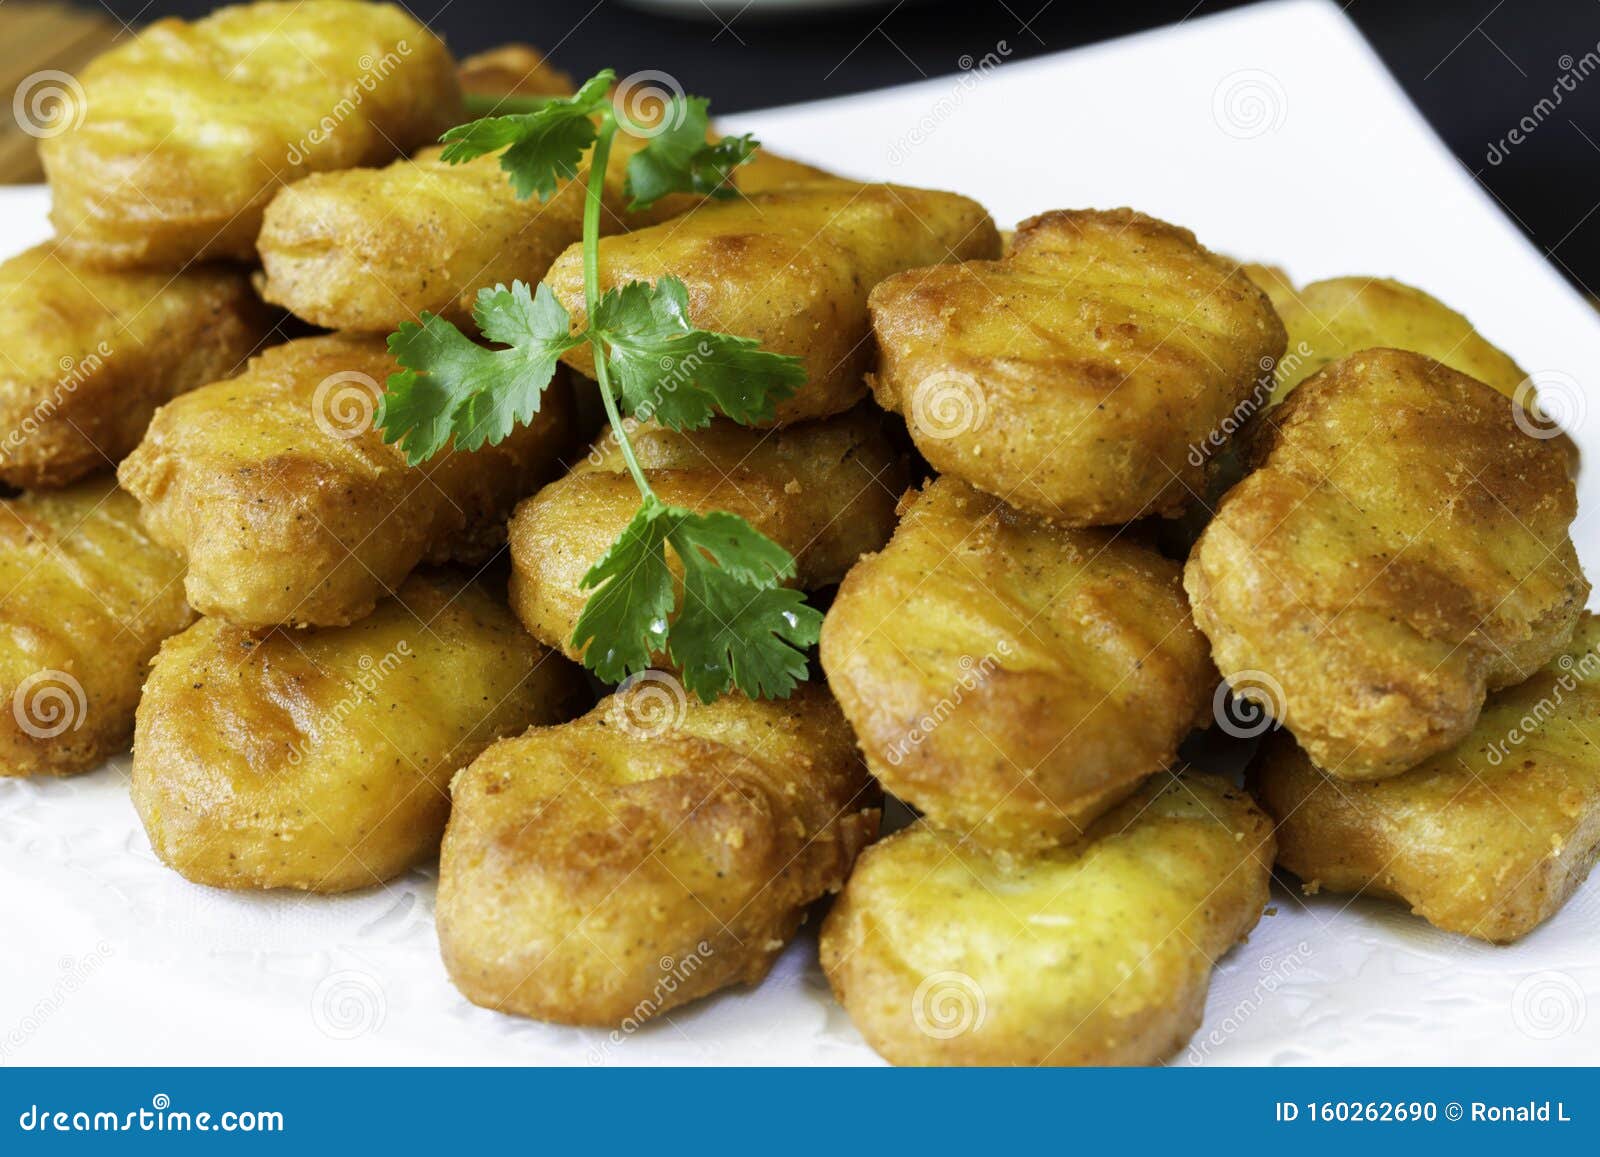 Asian Style Battered and Deep Fried Chicken Nugget Stock Photo - Image ...